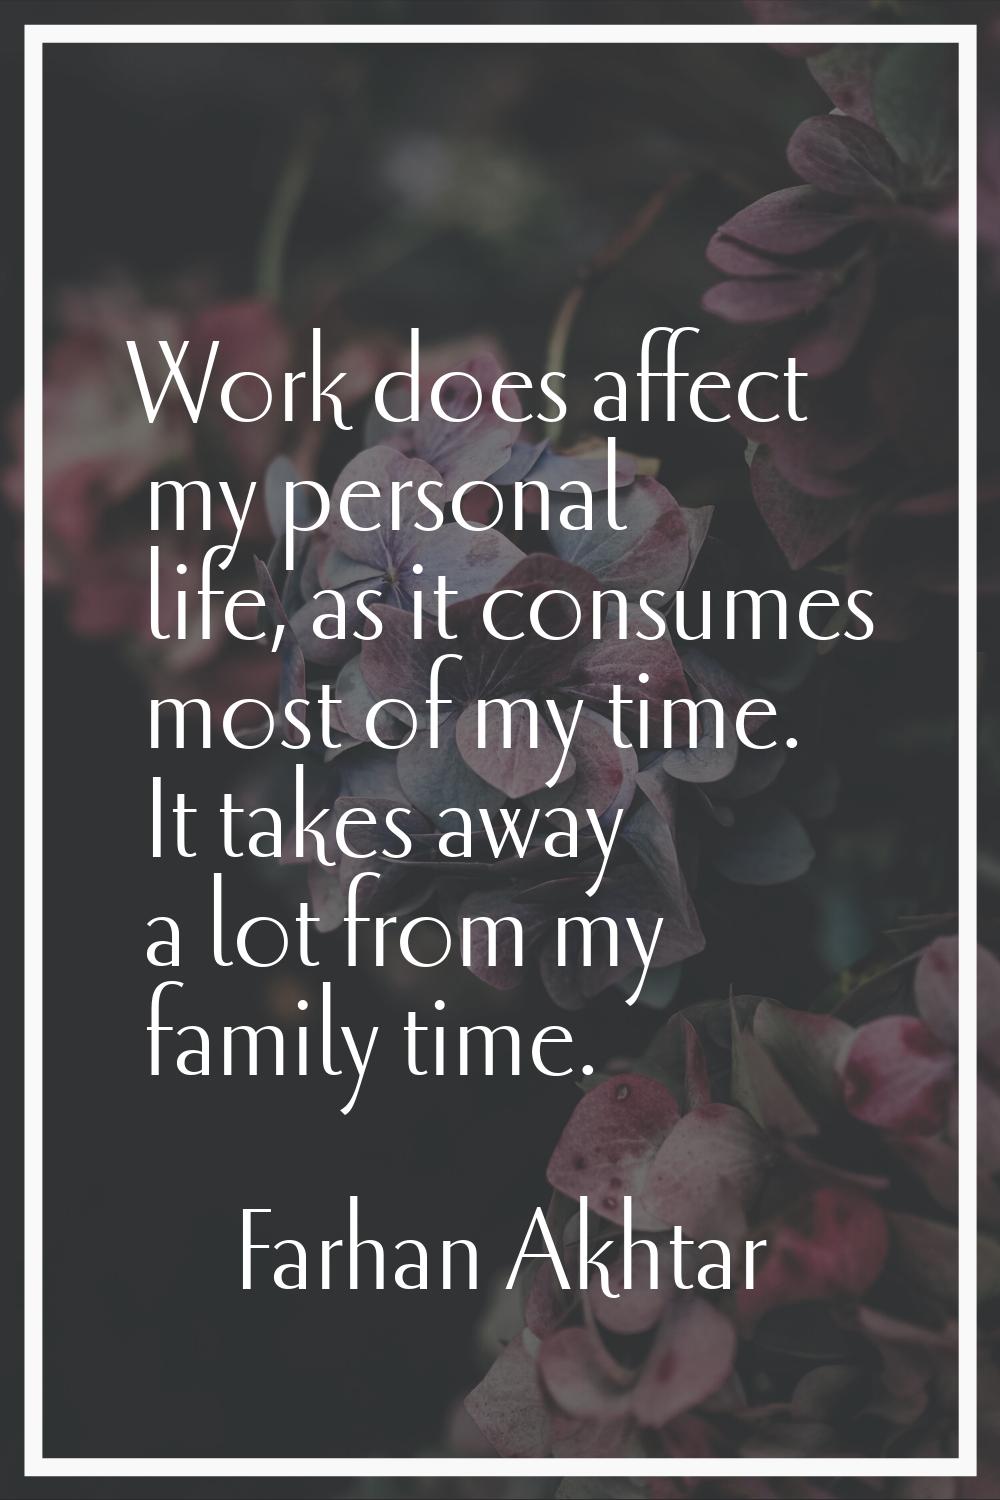 Work does affect my personal life, as it consumes most of my time. It takes away a lot from my fami